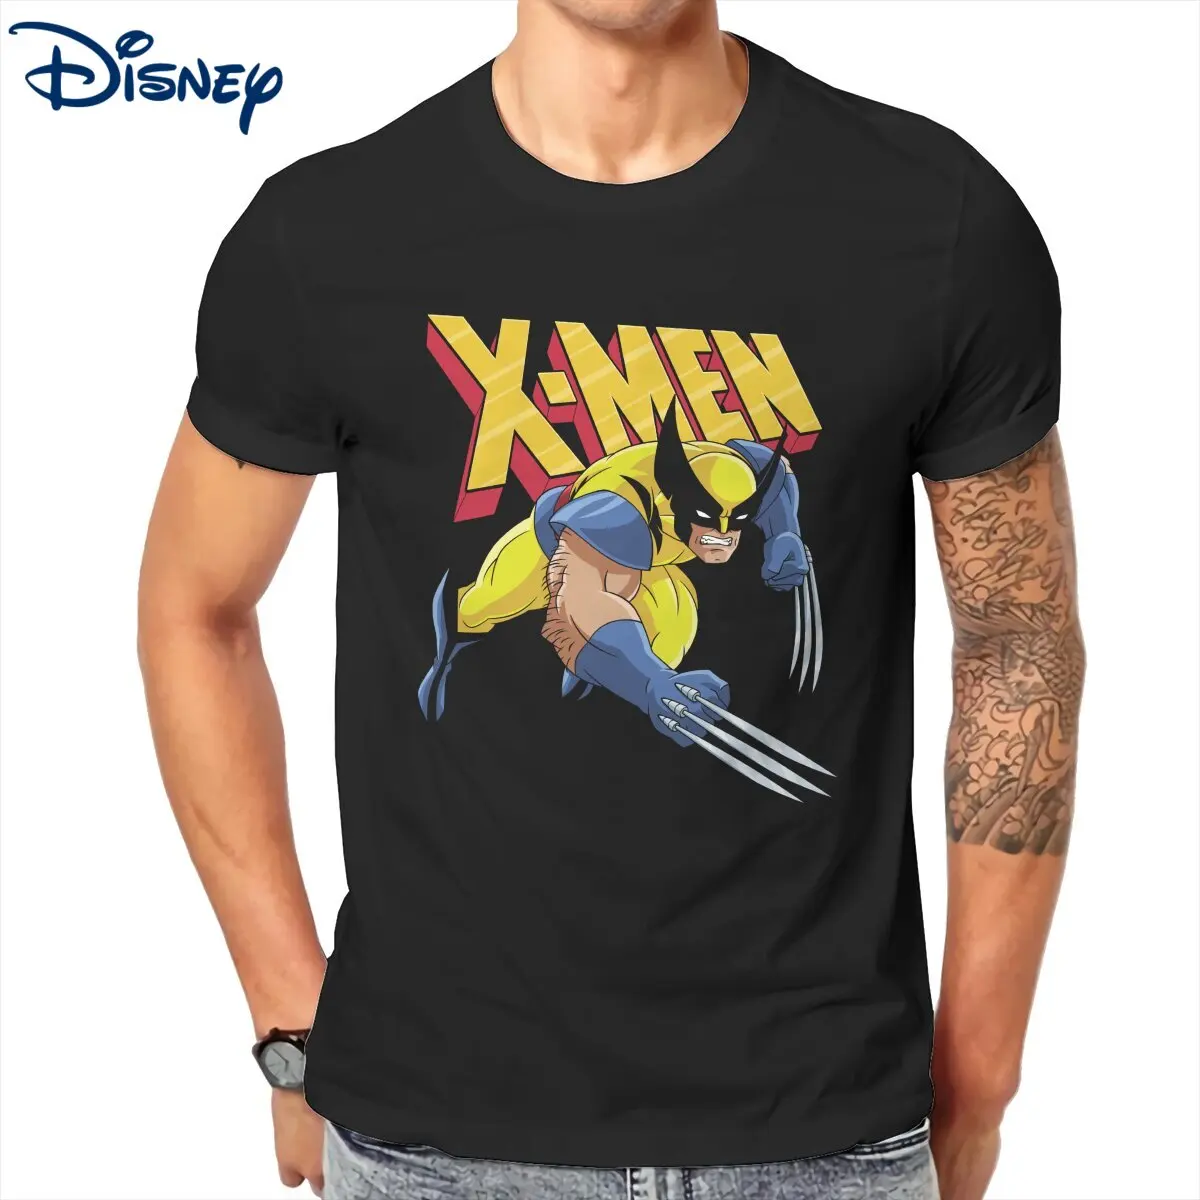 

Classic X-Men Wolverine With Claws Out Men's Disney T Shirts Crazy Tee Shirt Short Sleeve T-Shirts 100% Cotton Printed Tops